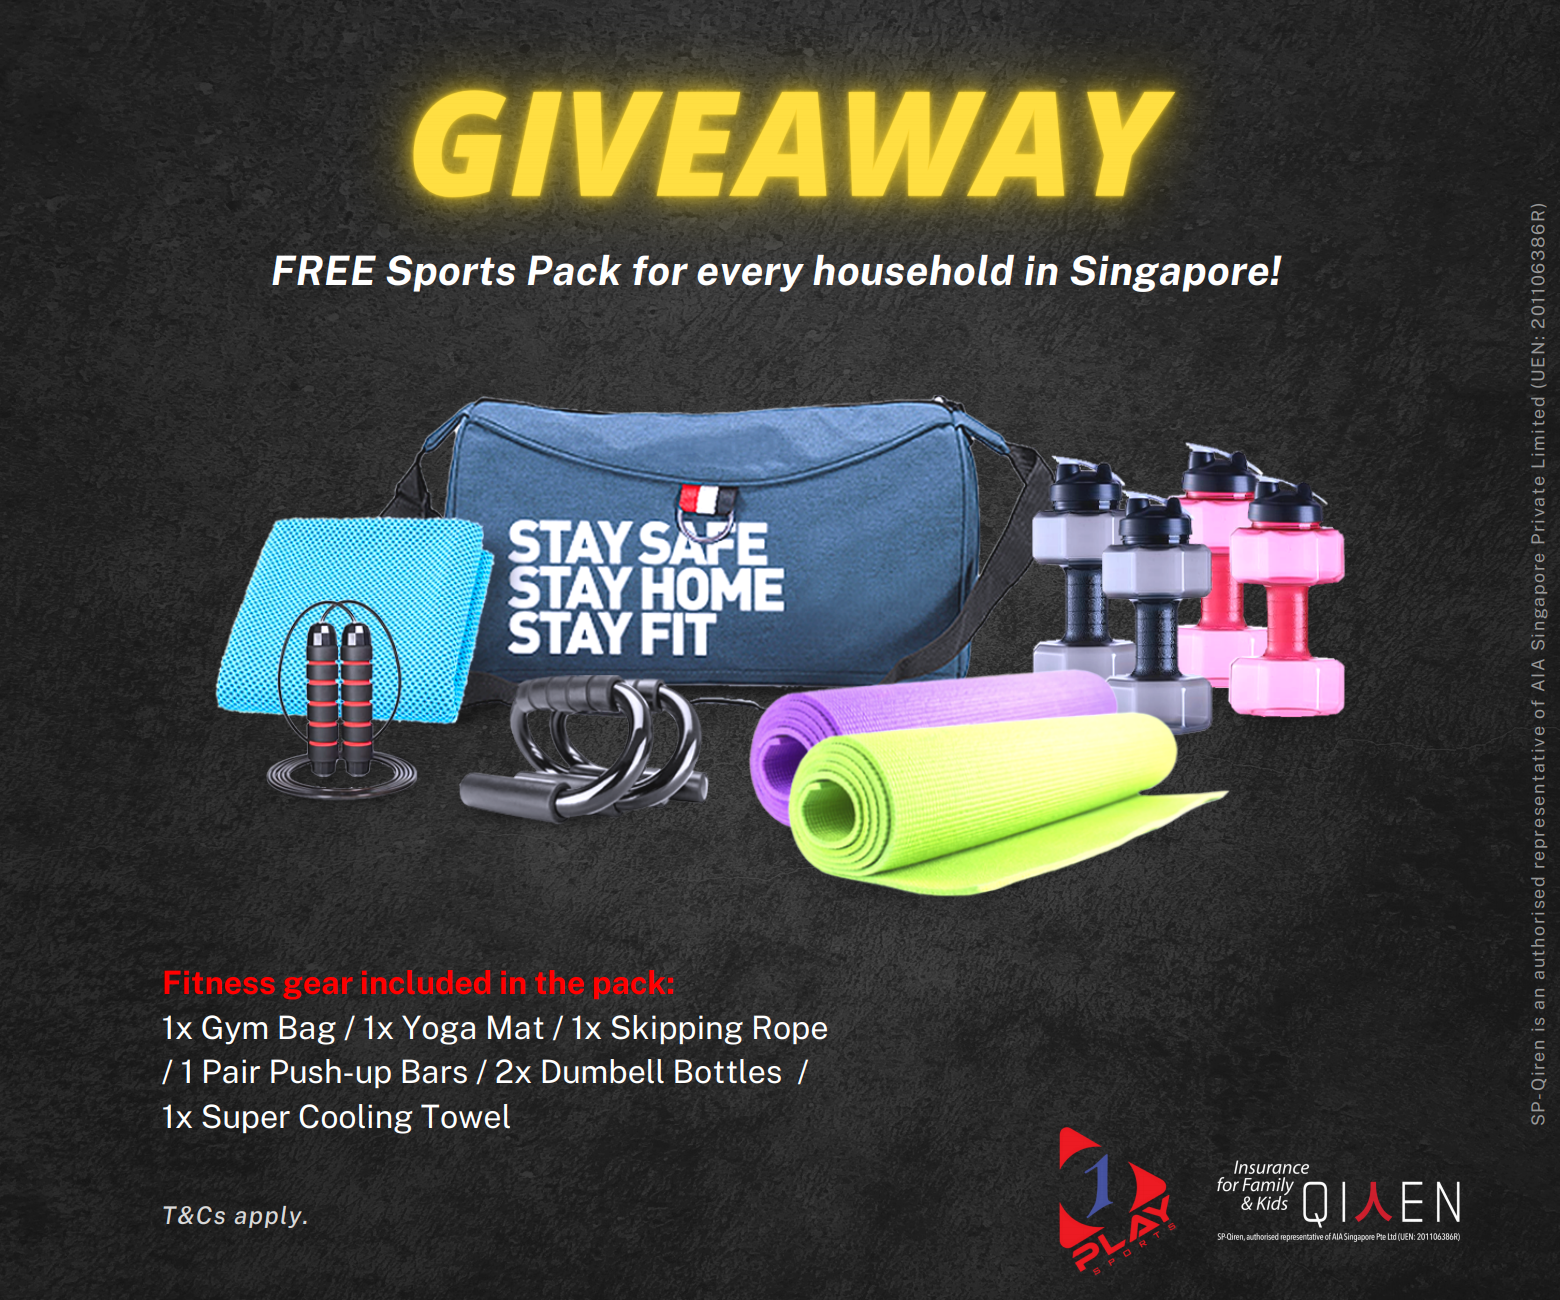 FREE Sports Pack for every household in Singapore!